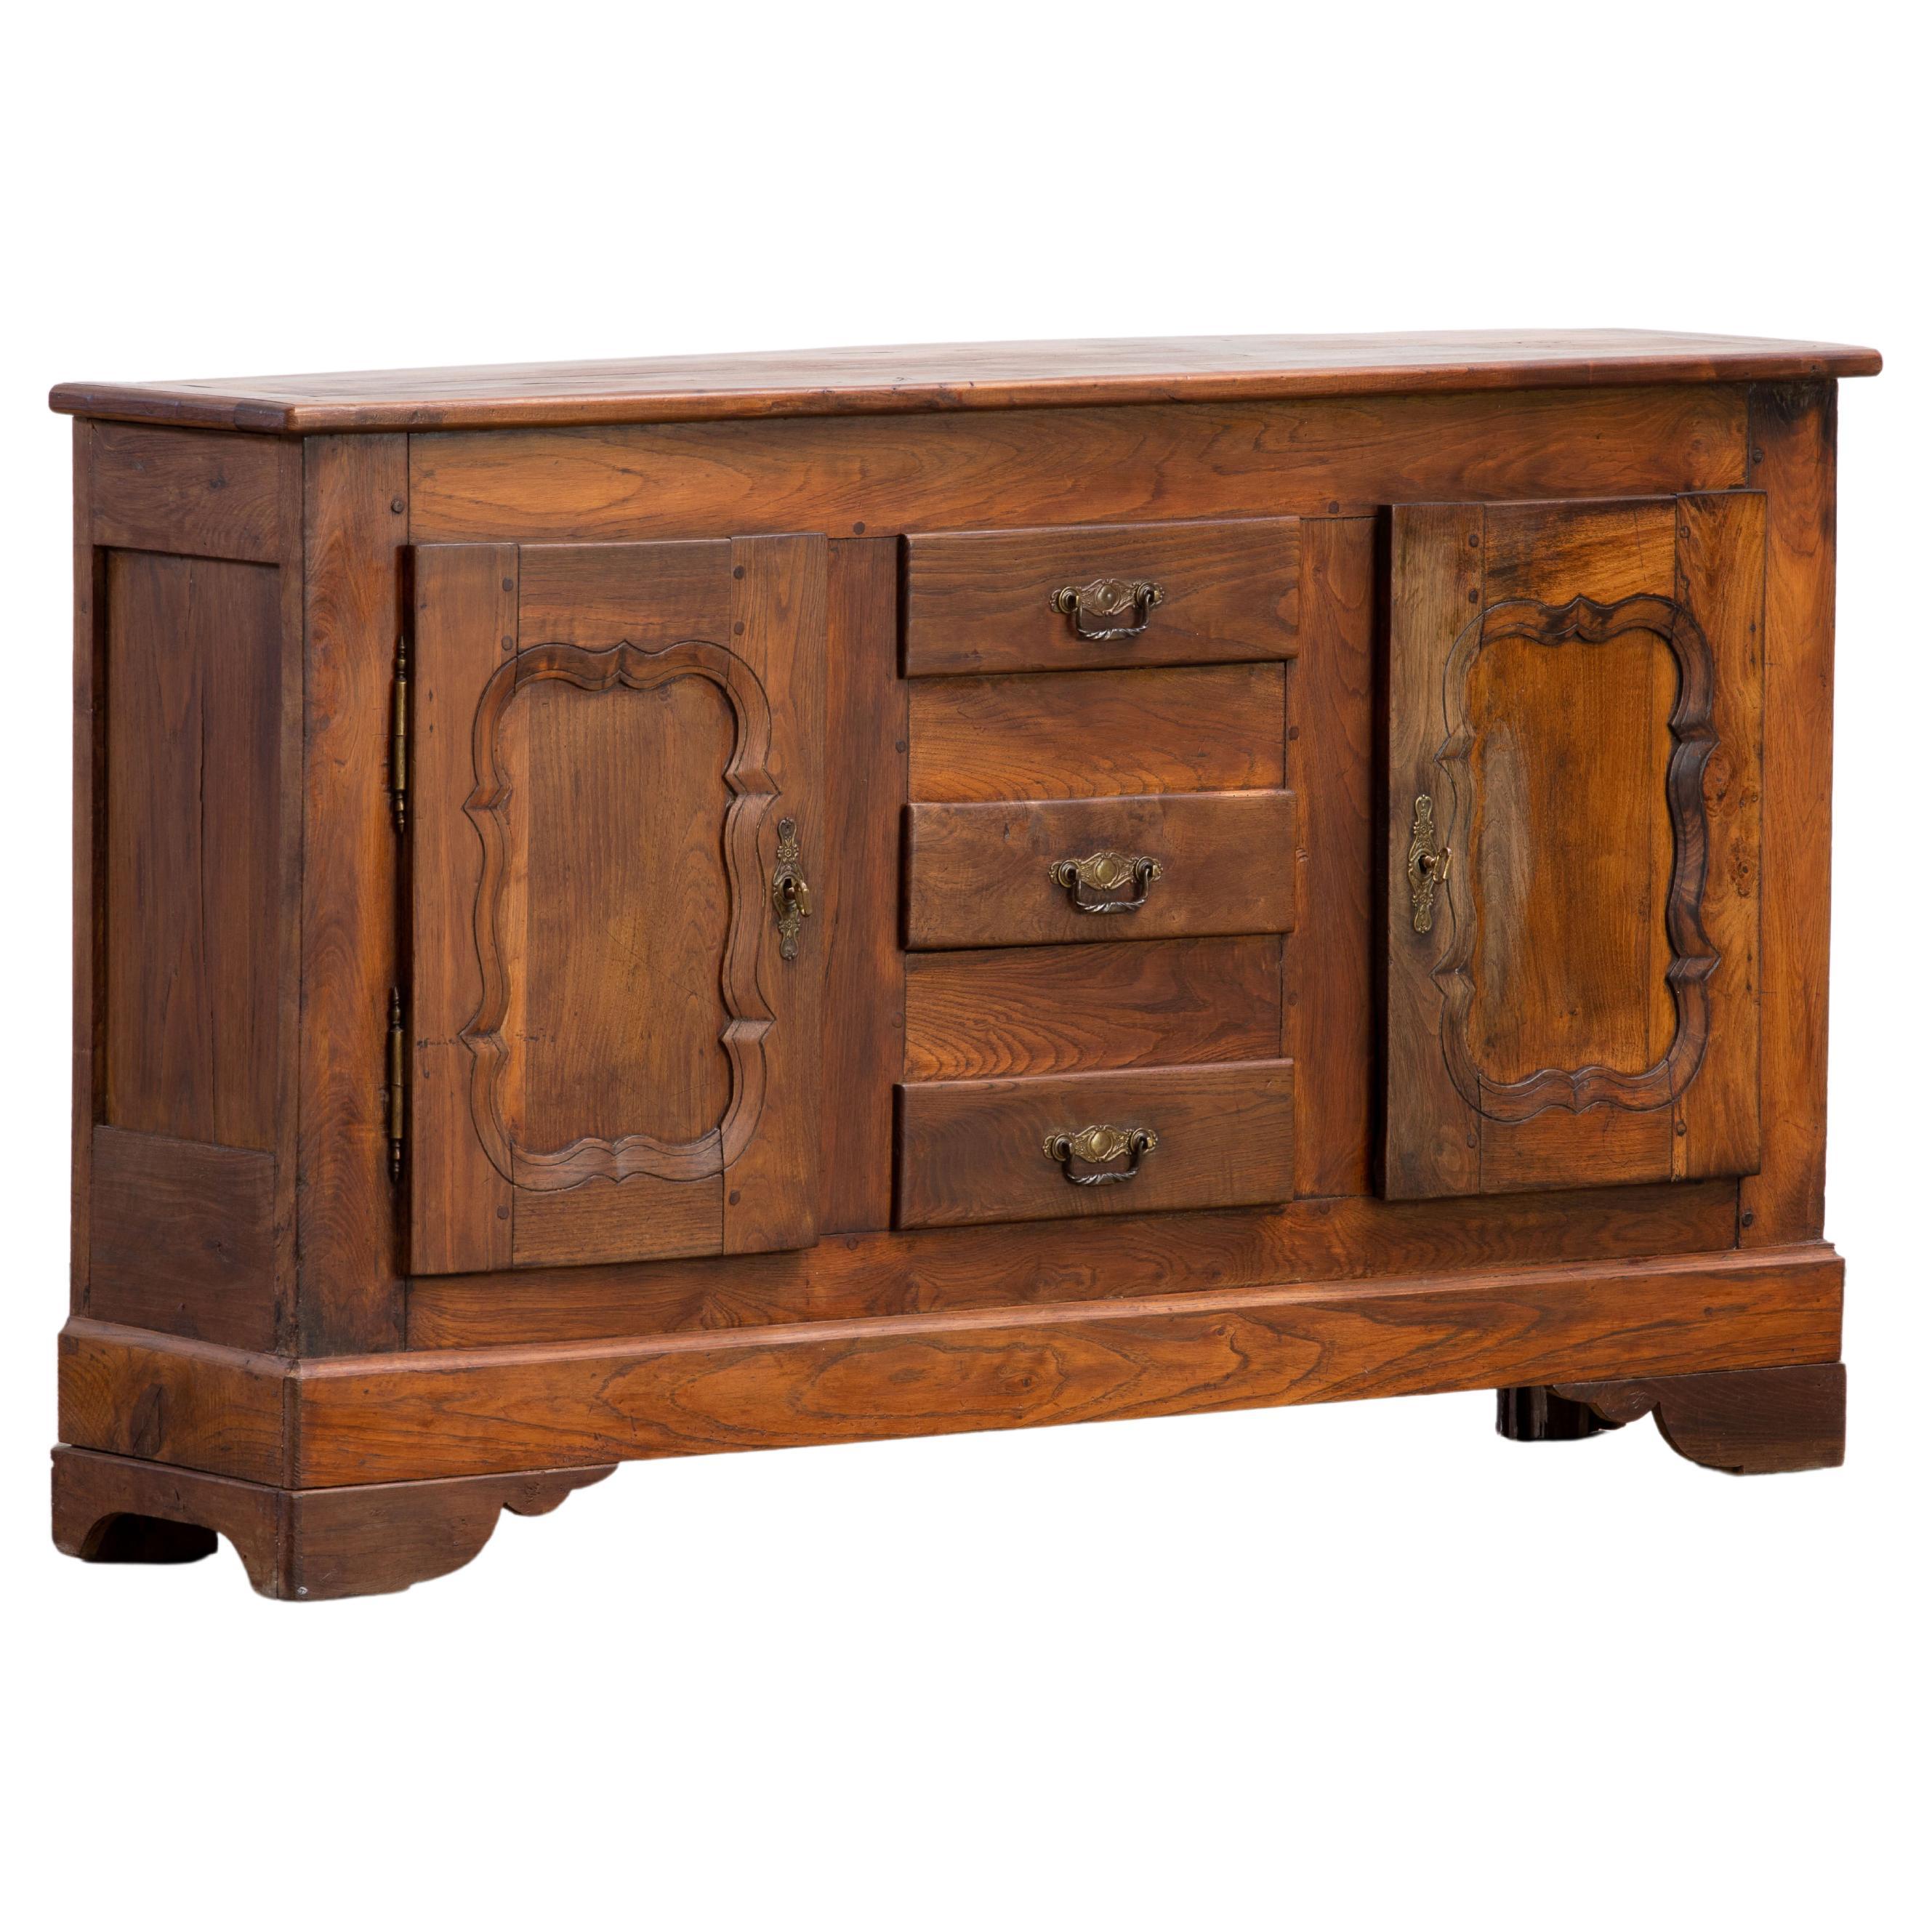 19th Century French Provencal Oak Buffet Cabinet